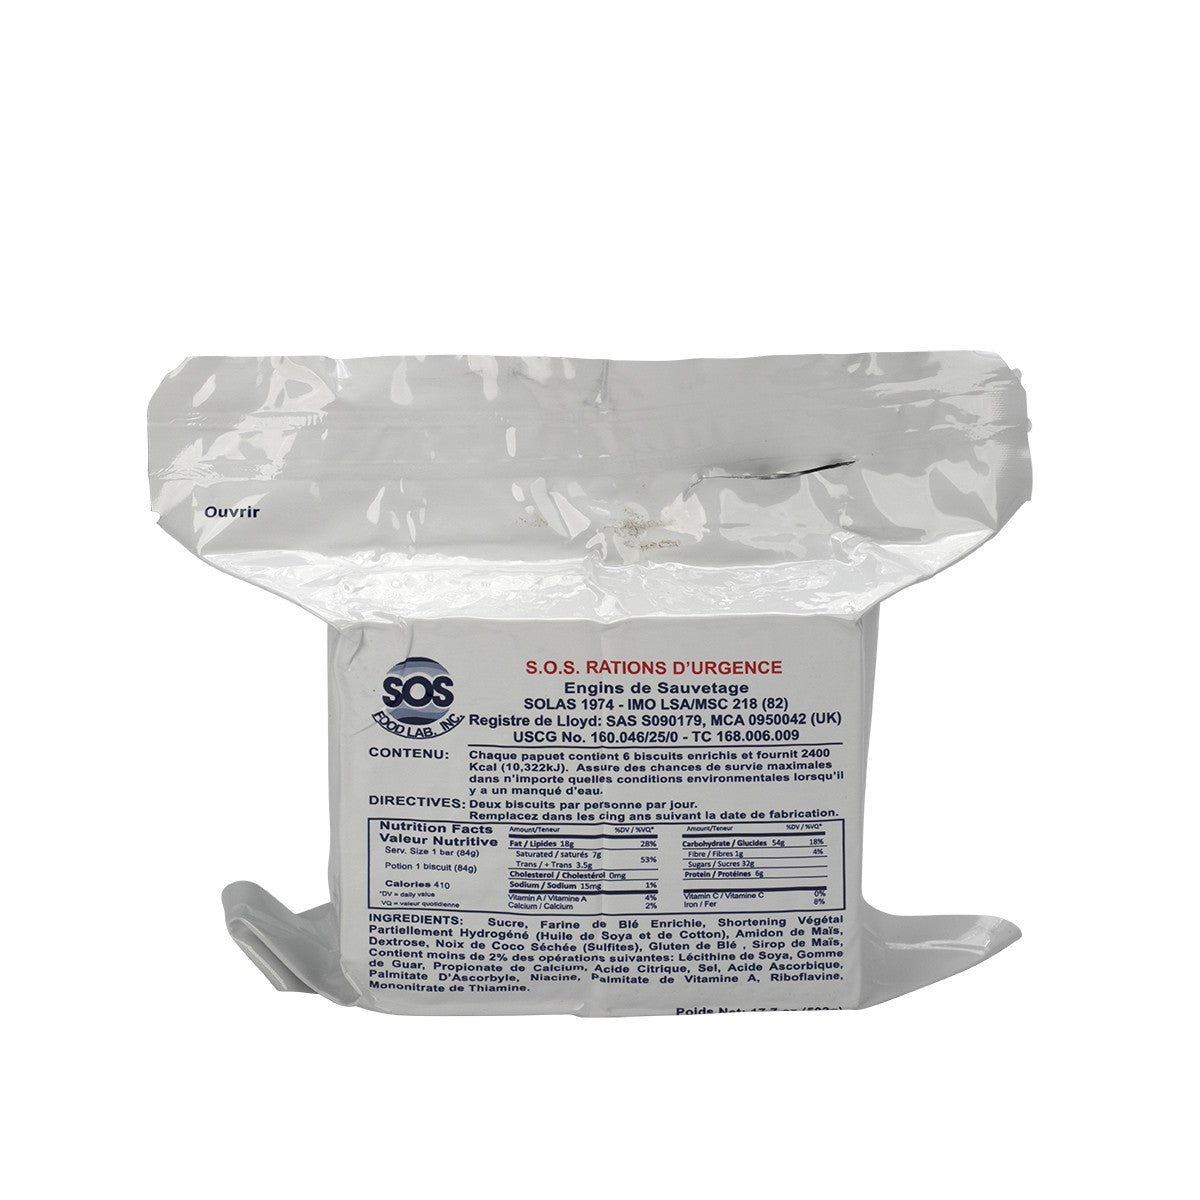 Emergency Food Ration Pack, 2400 Calories - W-805958